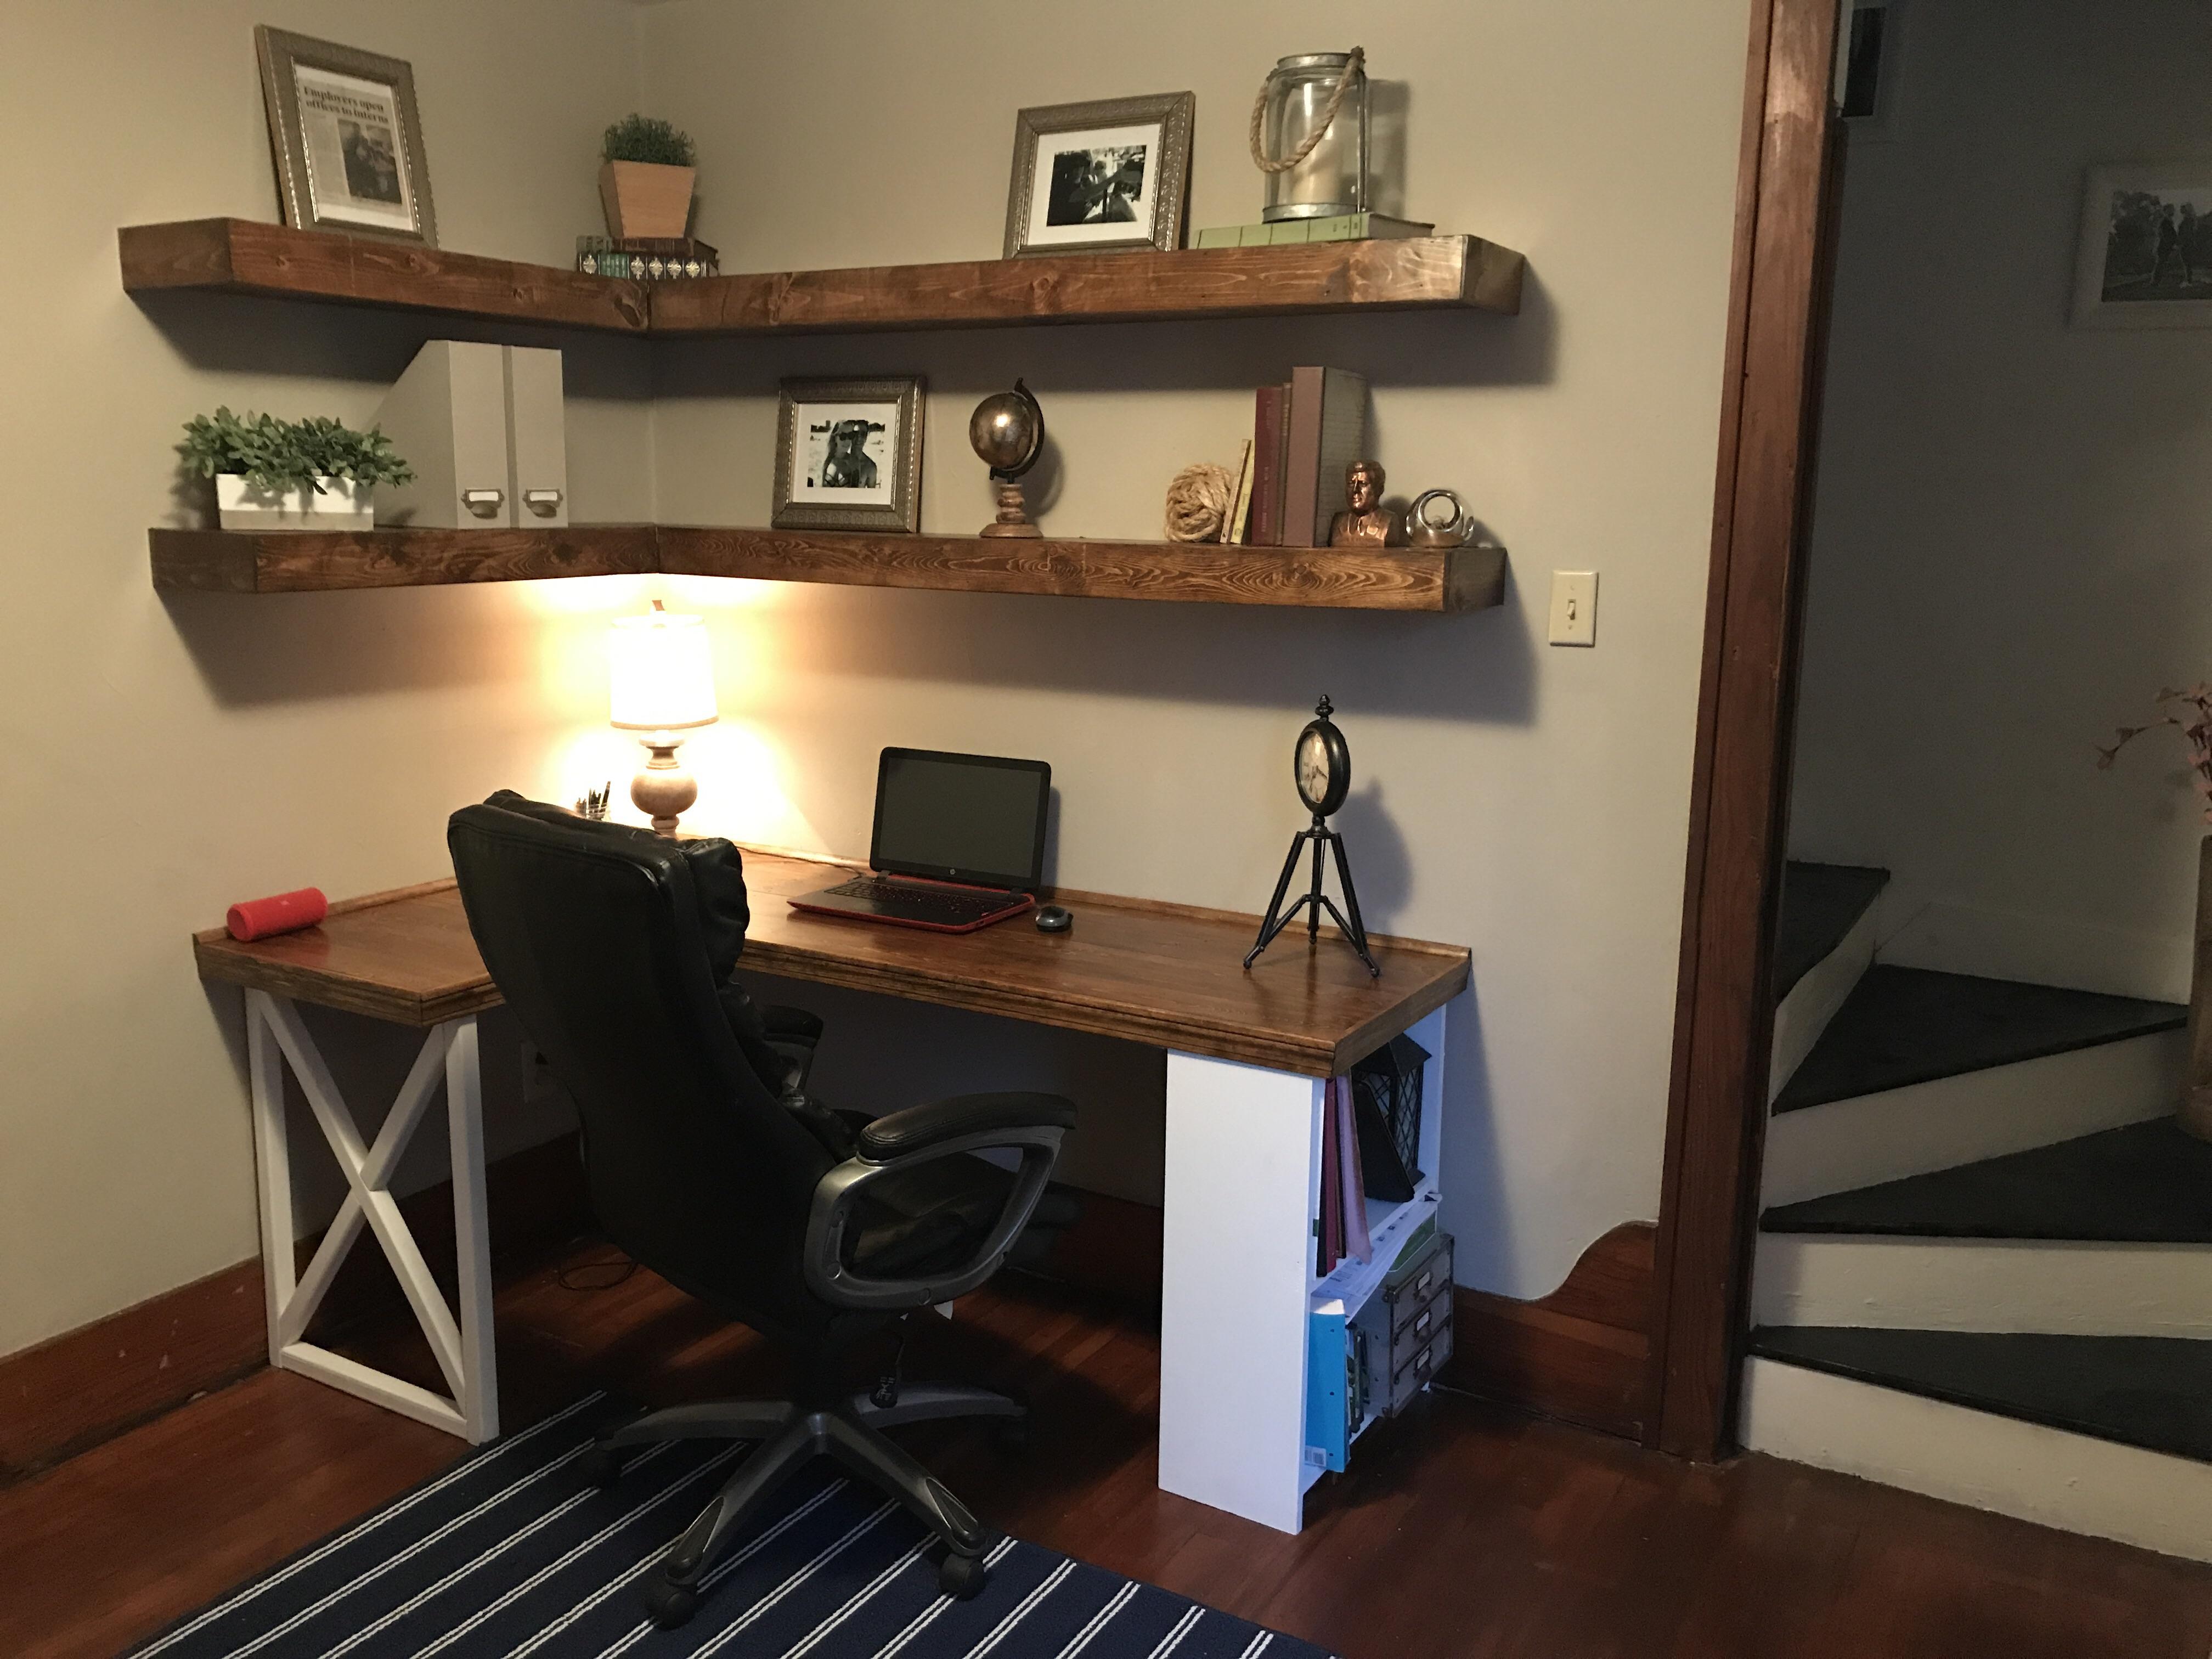 made built desk and floating shelves girlfriend house over spring break thanks for letting borrow the tools decorative shelf supports wood cable box mounting ideas natural ture